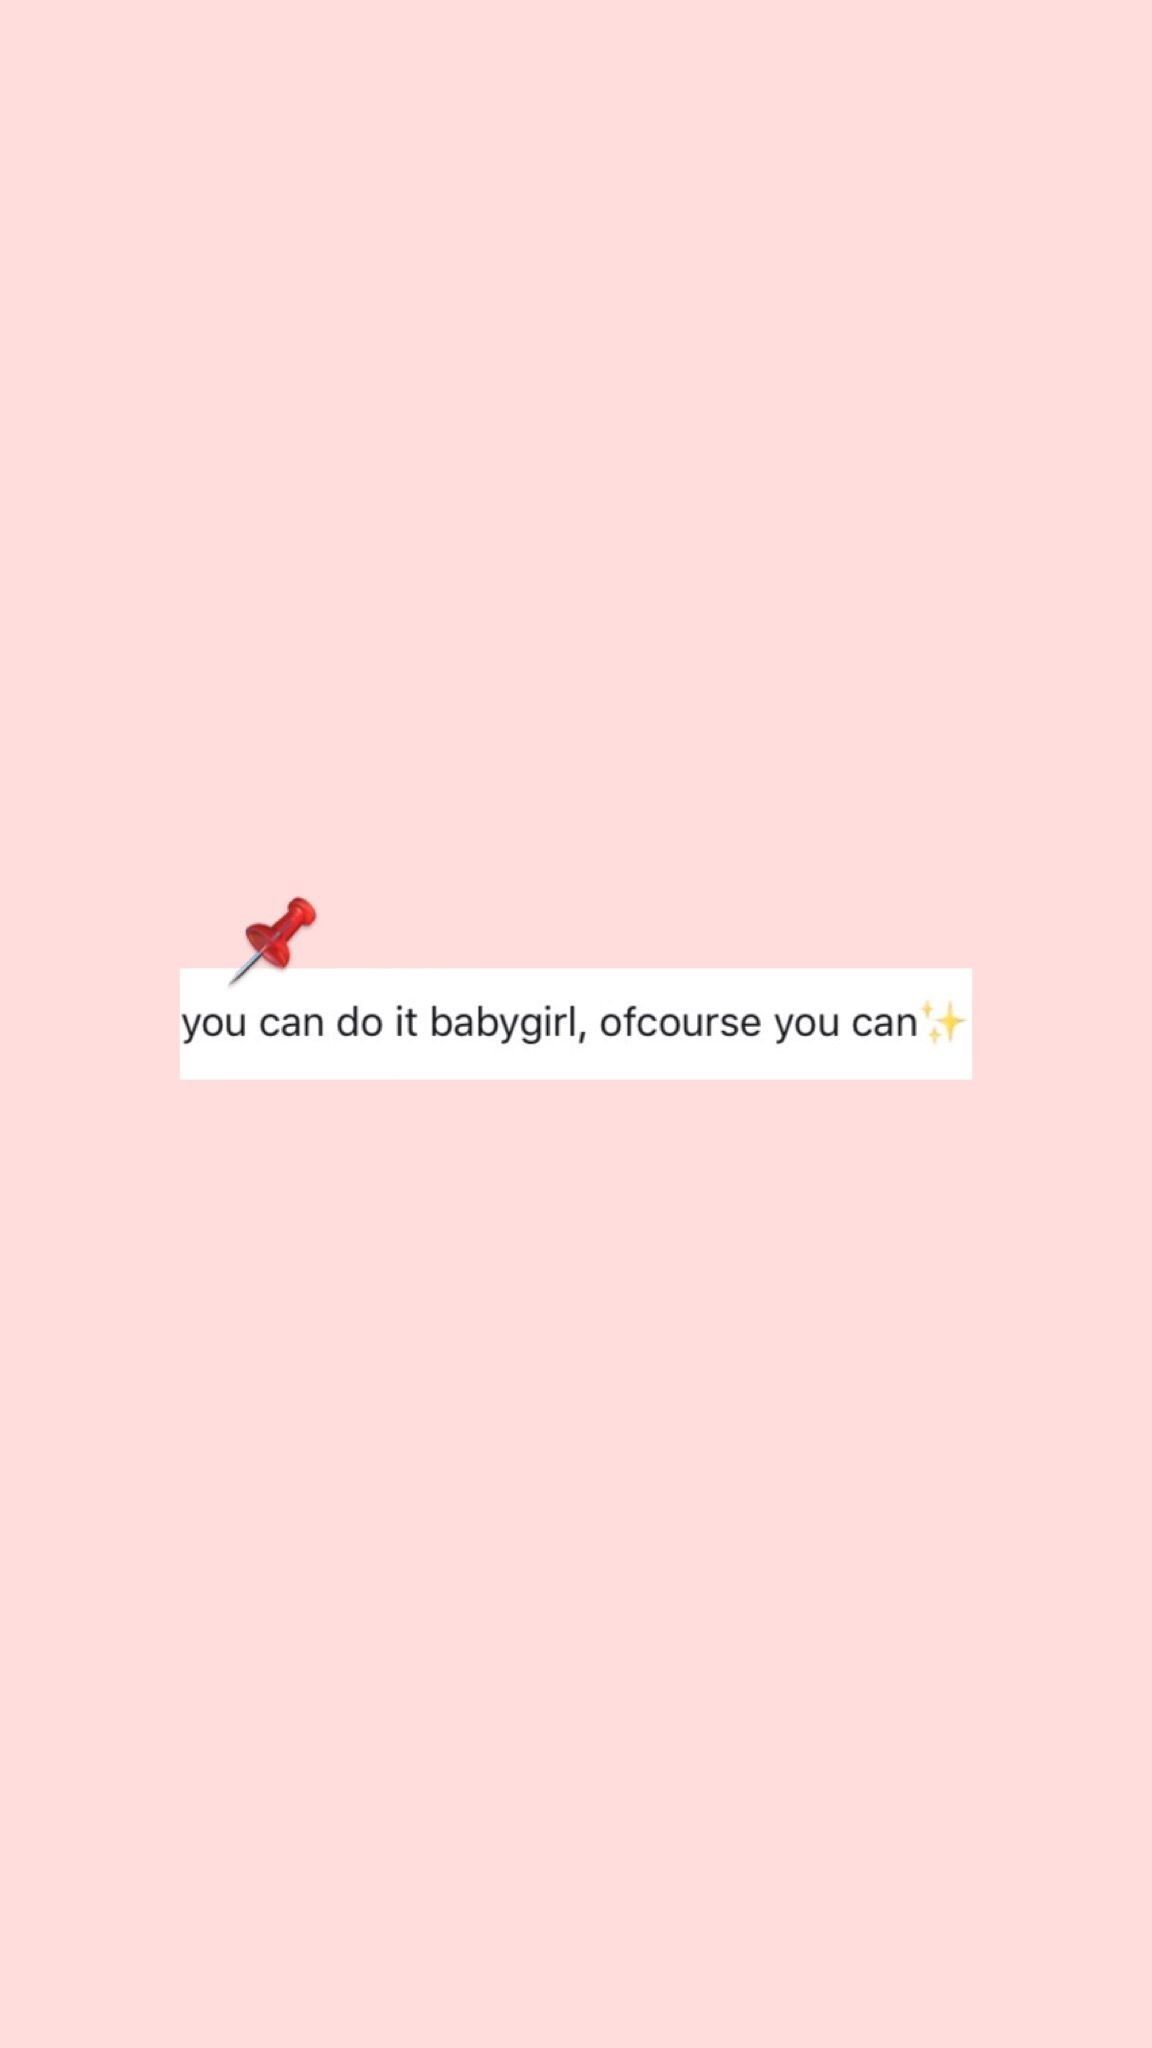 Awesome Baby Girl Aesthetic Wallpaper - Inspirational quotes, Wallpaper quotes, Positive quotes